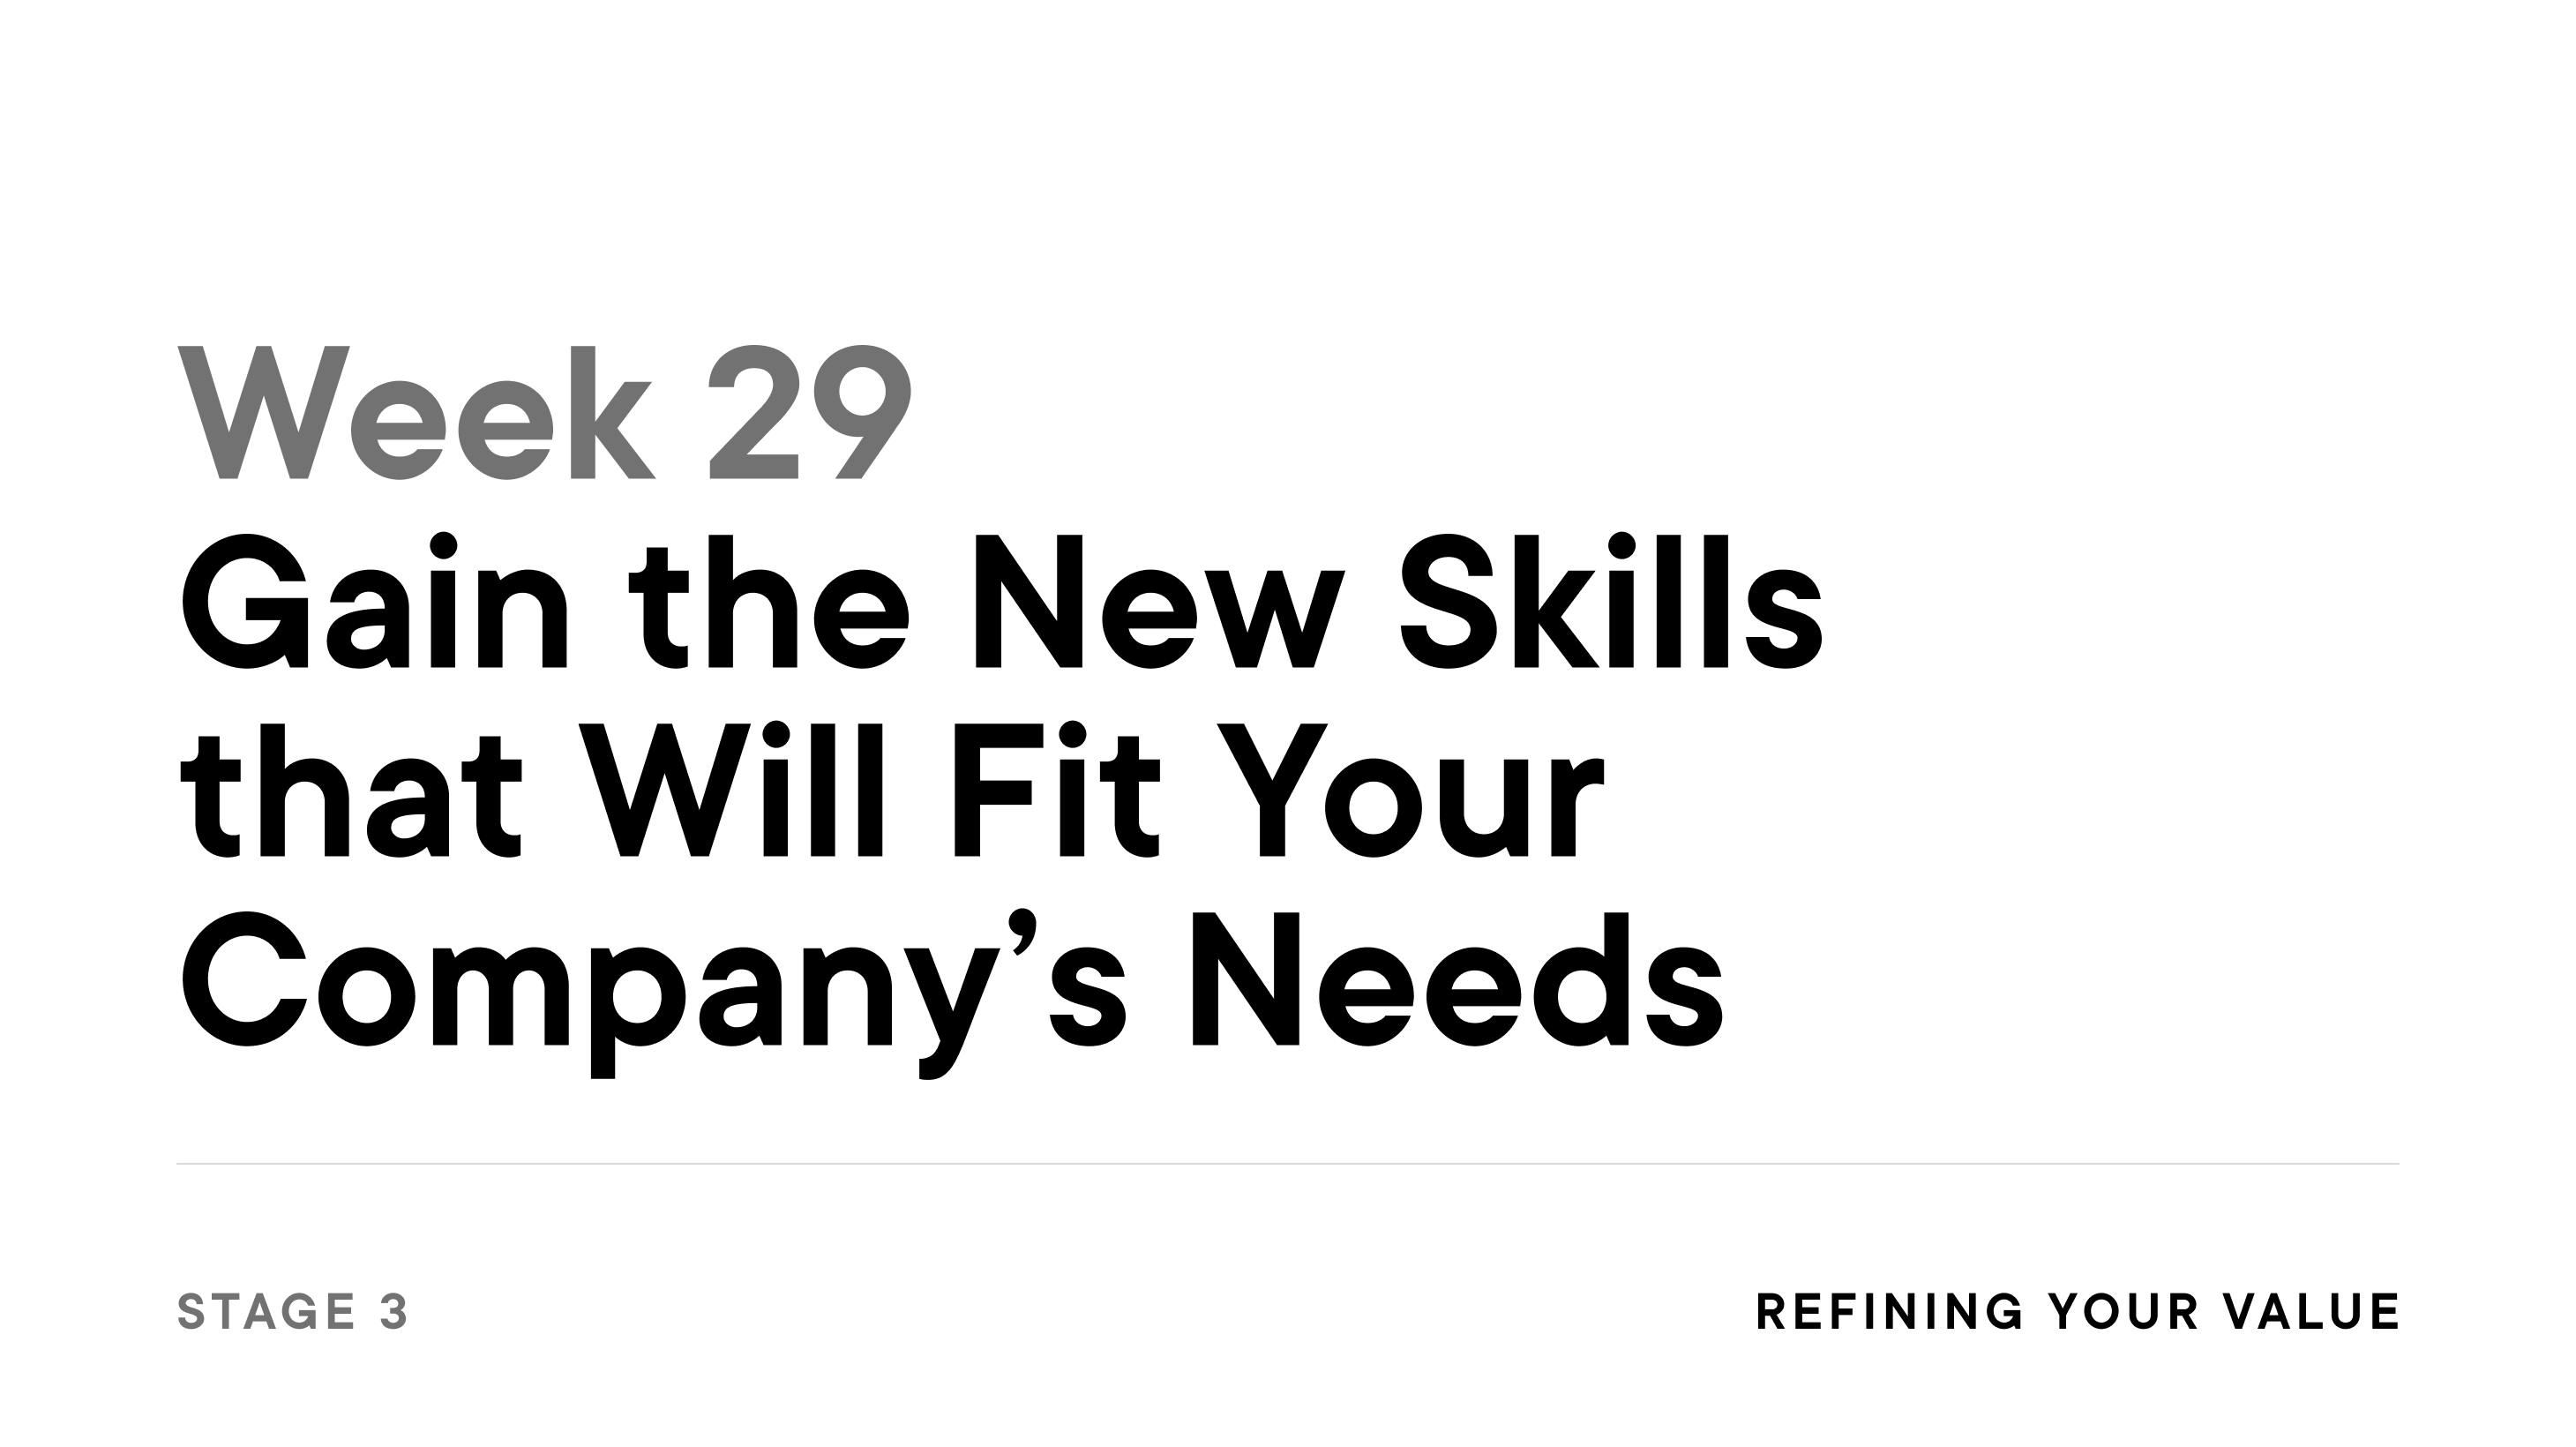 Week 29: Gain the New Skills that Will Fit Your Company’s Needs